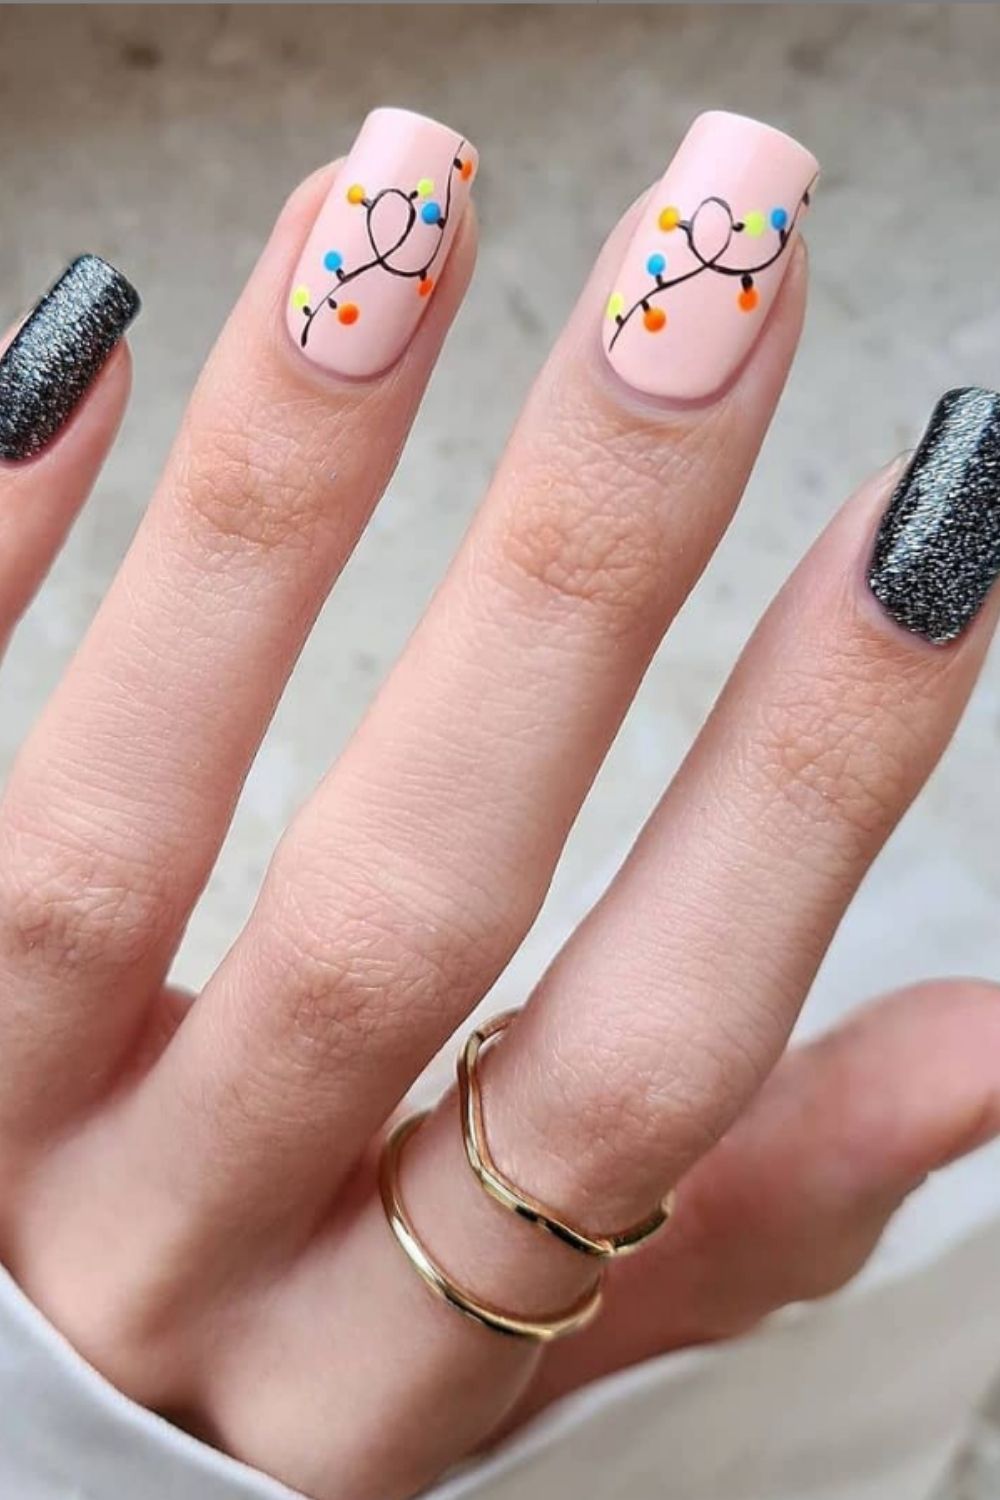 Short coffin nails | All the 2021 Nail Trends You'll Want to Wear ASAP 